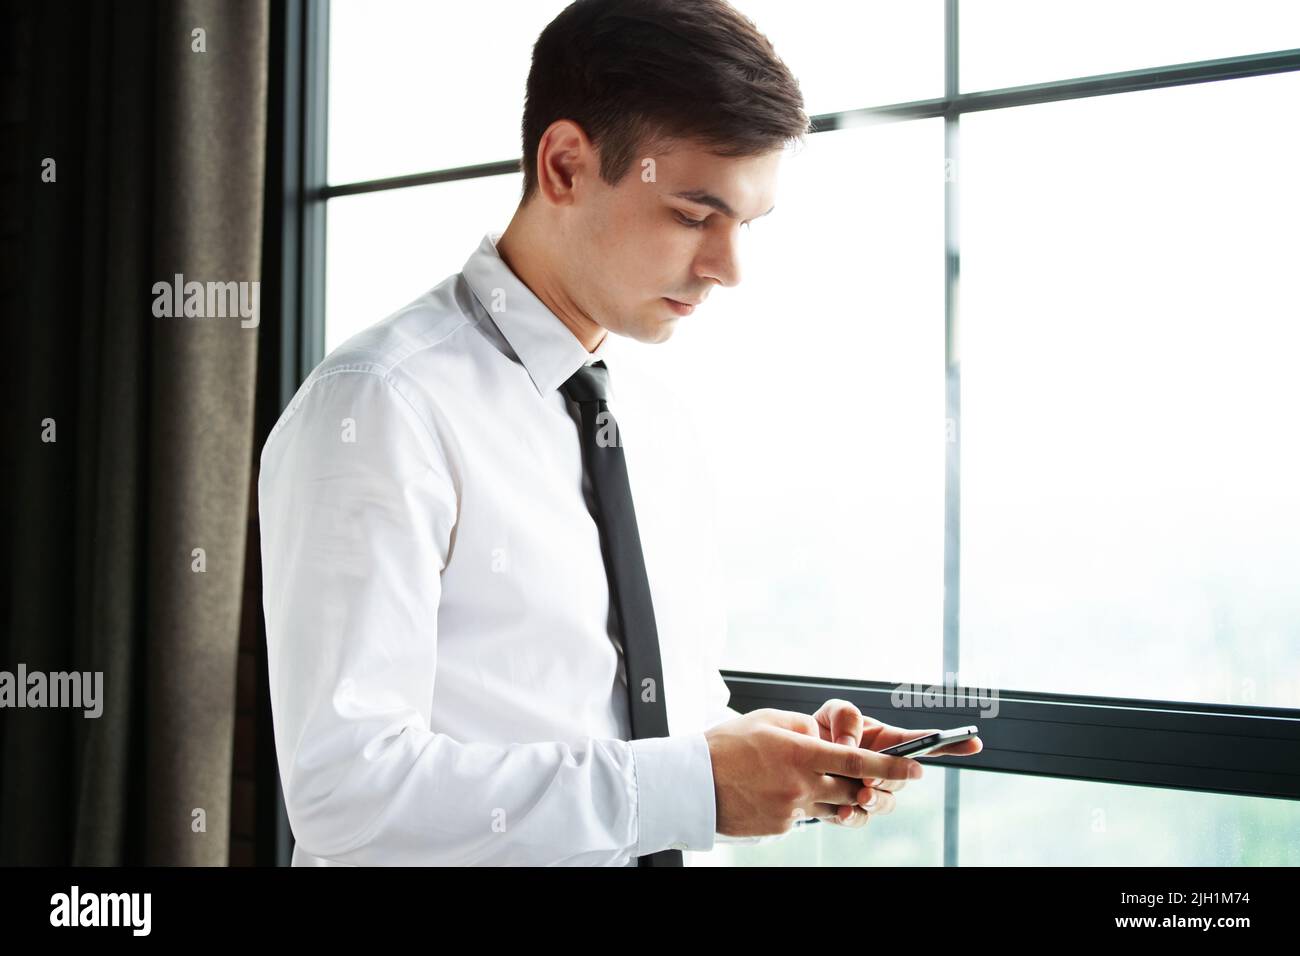 Portrait of a young handsome businessman using his phone. Stock Photo